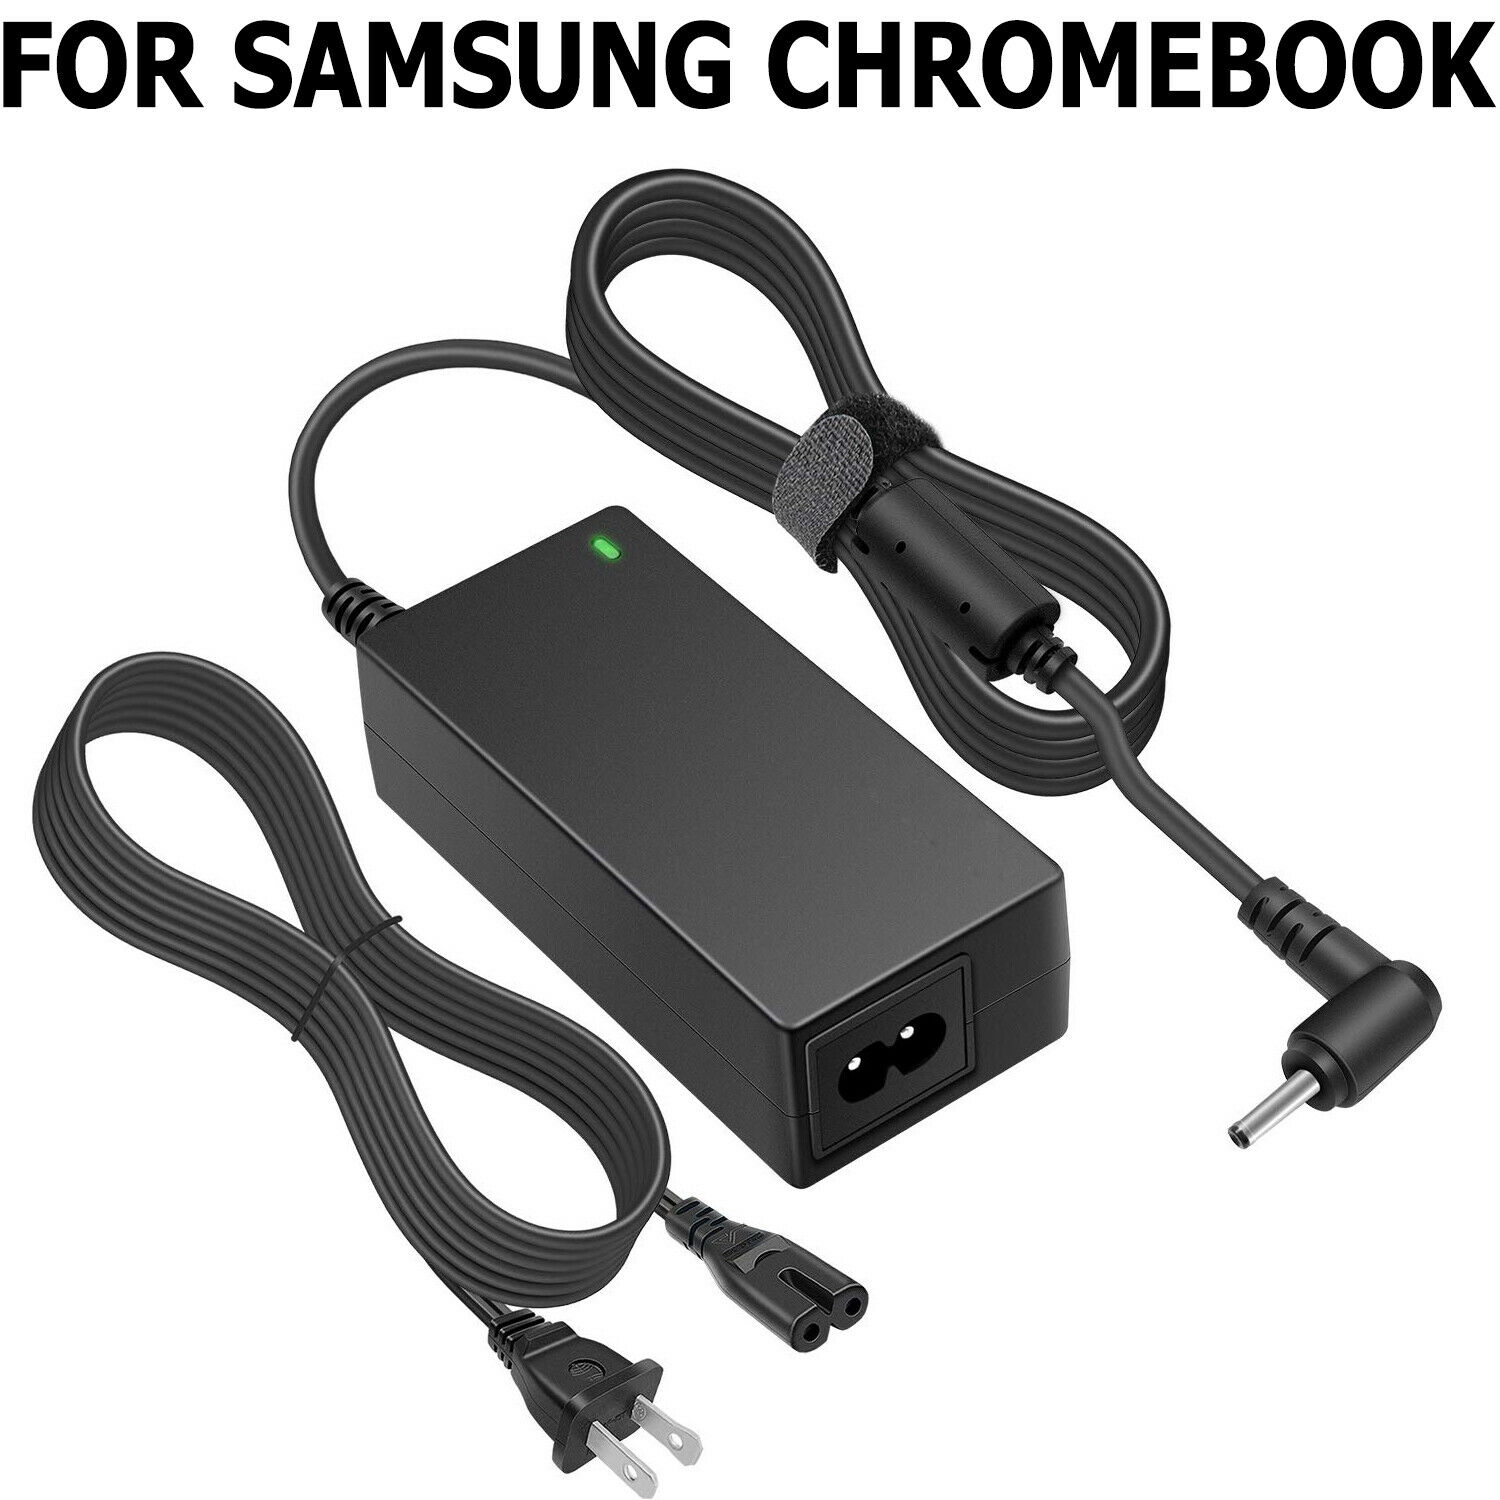 40W 12V 3.33A 2.2A Ac Laptop Charger for Samsung Chrome Notebook Adapter Compatible Brand: For Samsung Compatible Pro